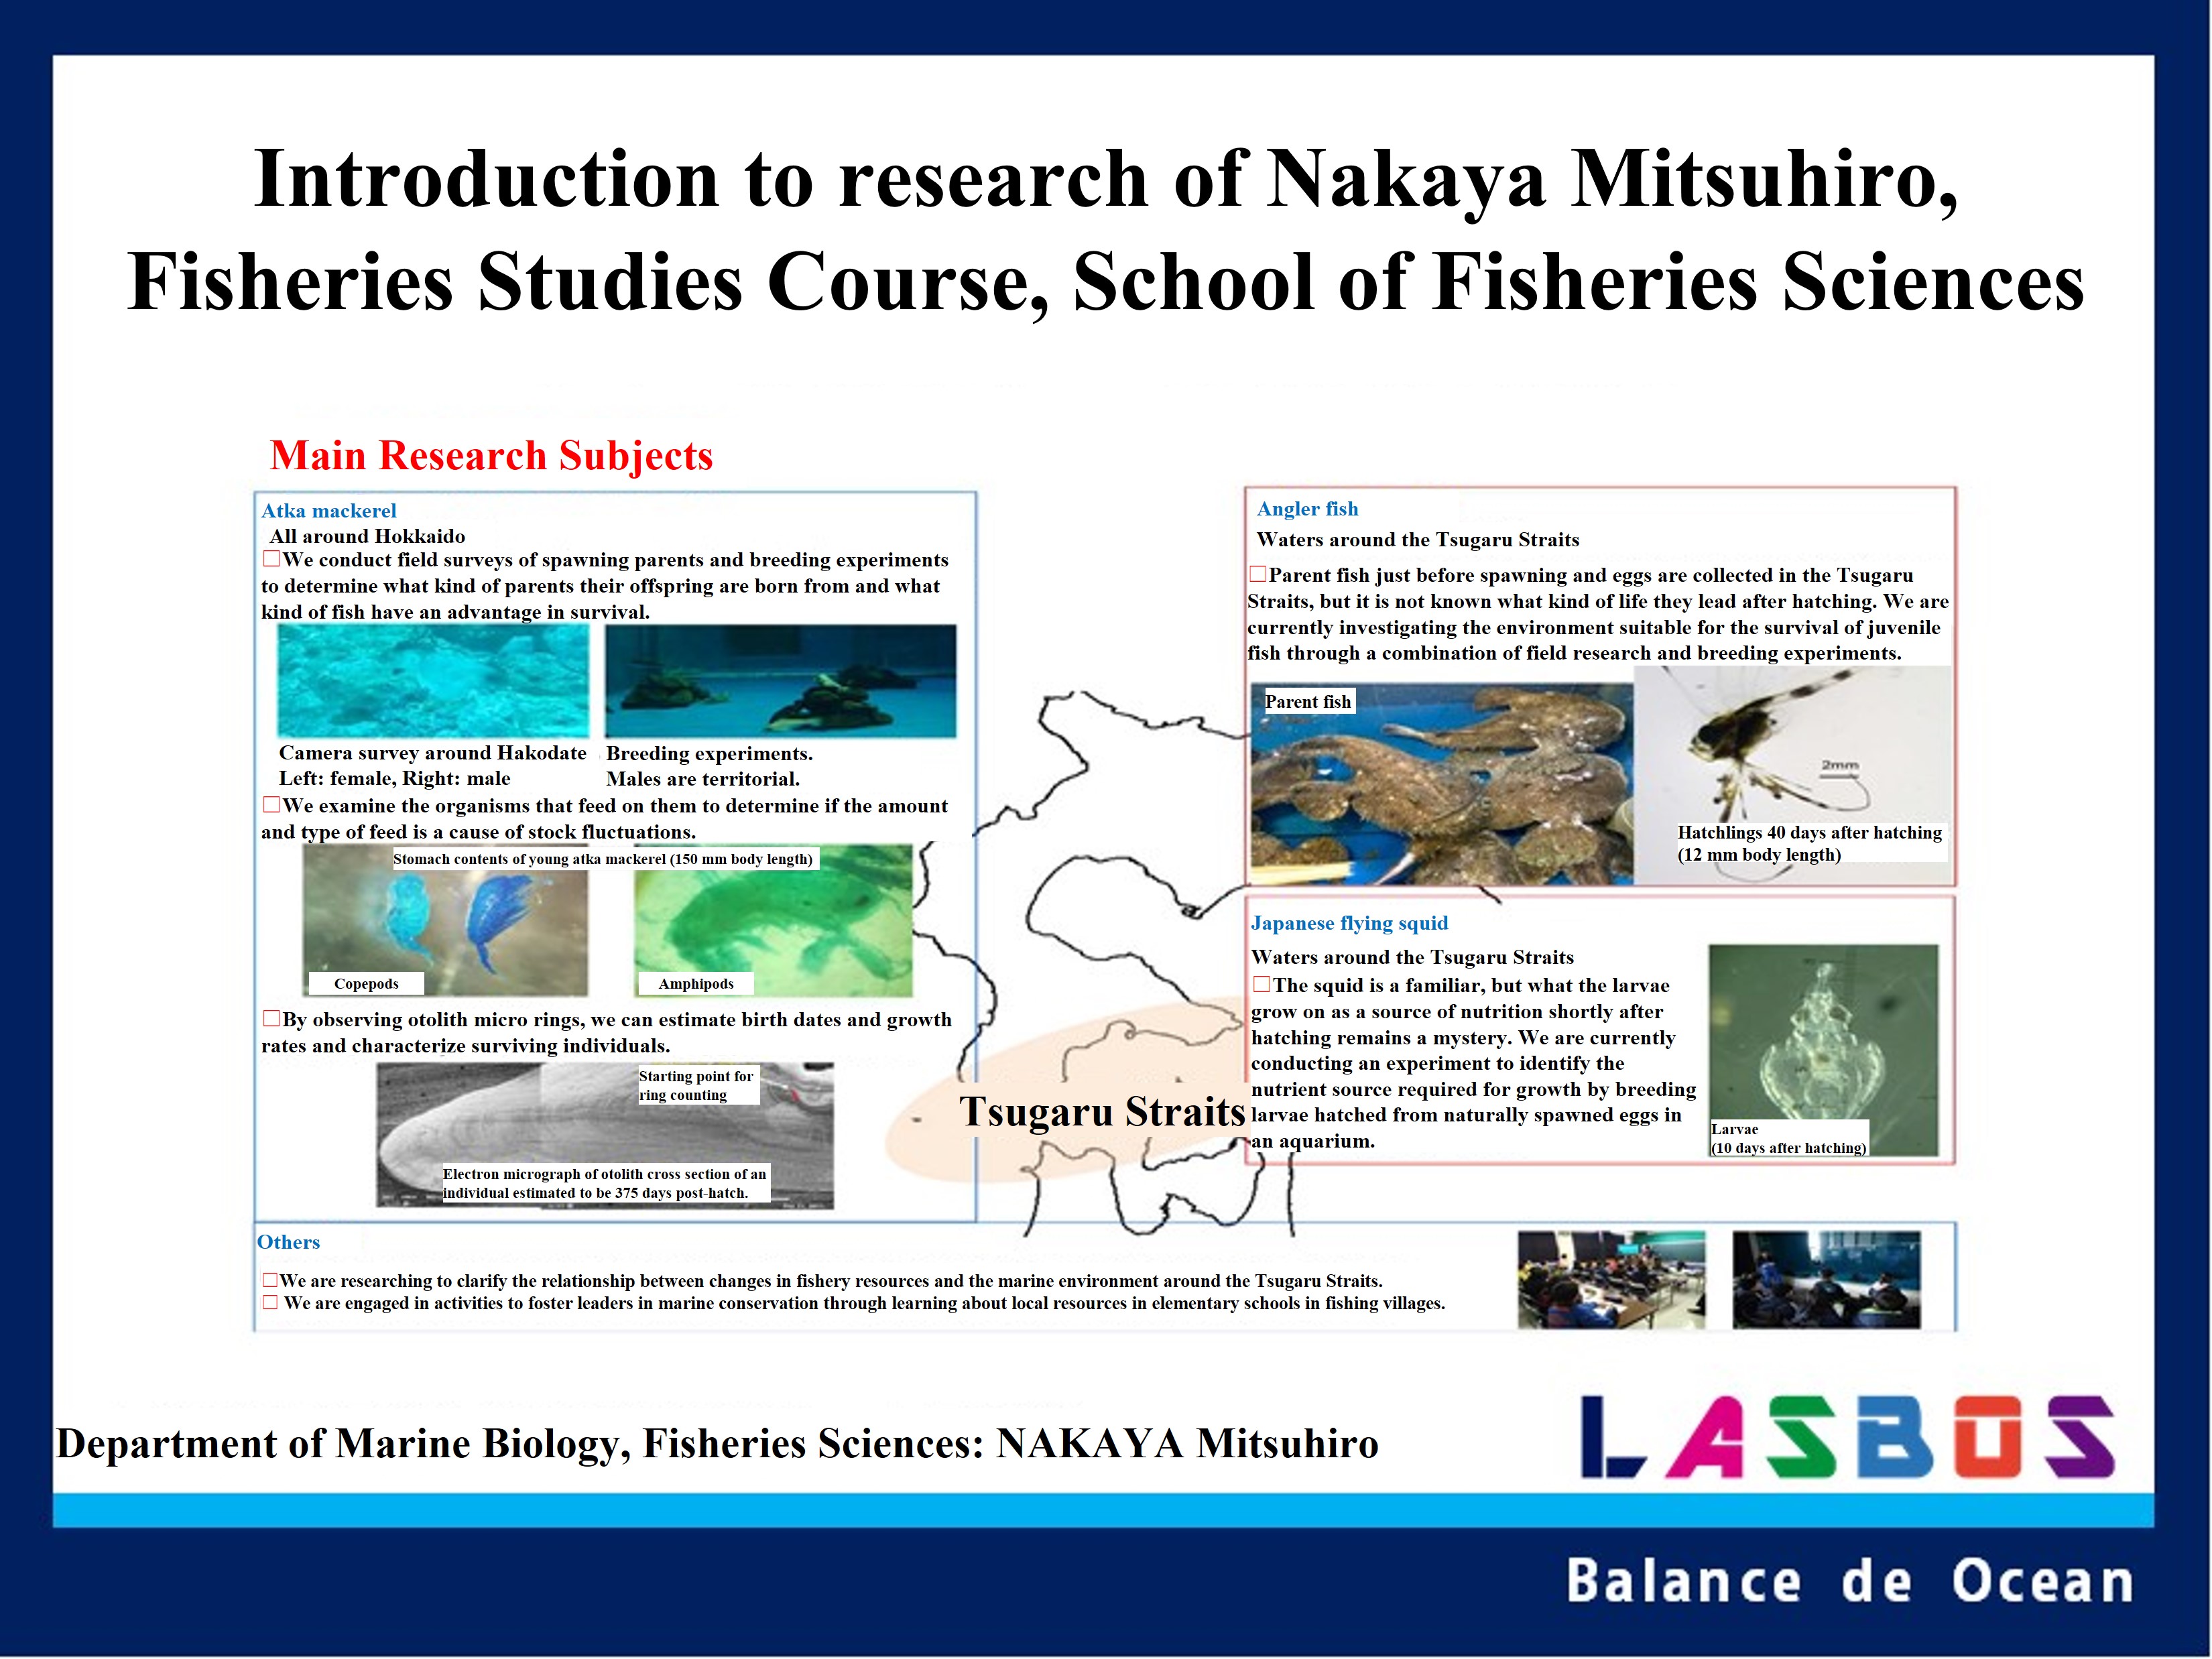 Introduction to research of Nakaya Mitsuhiro, Fisheries Studies Course, School of Fisheries Sciences